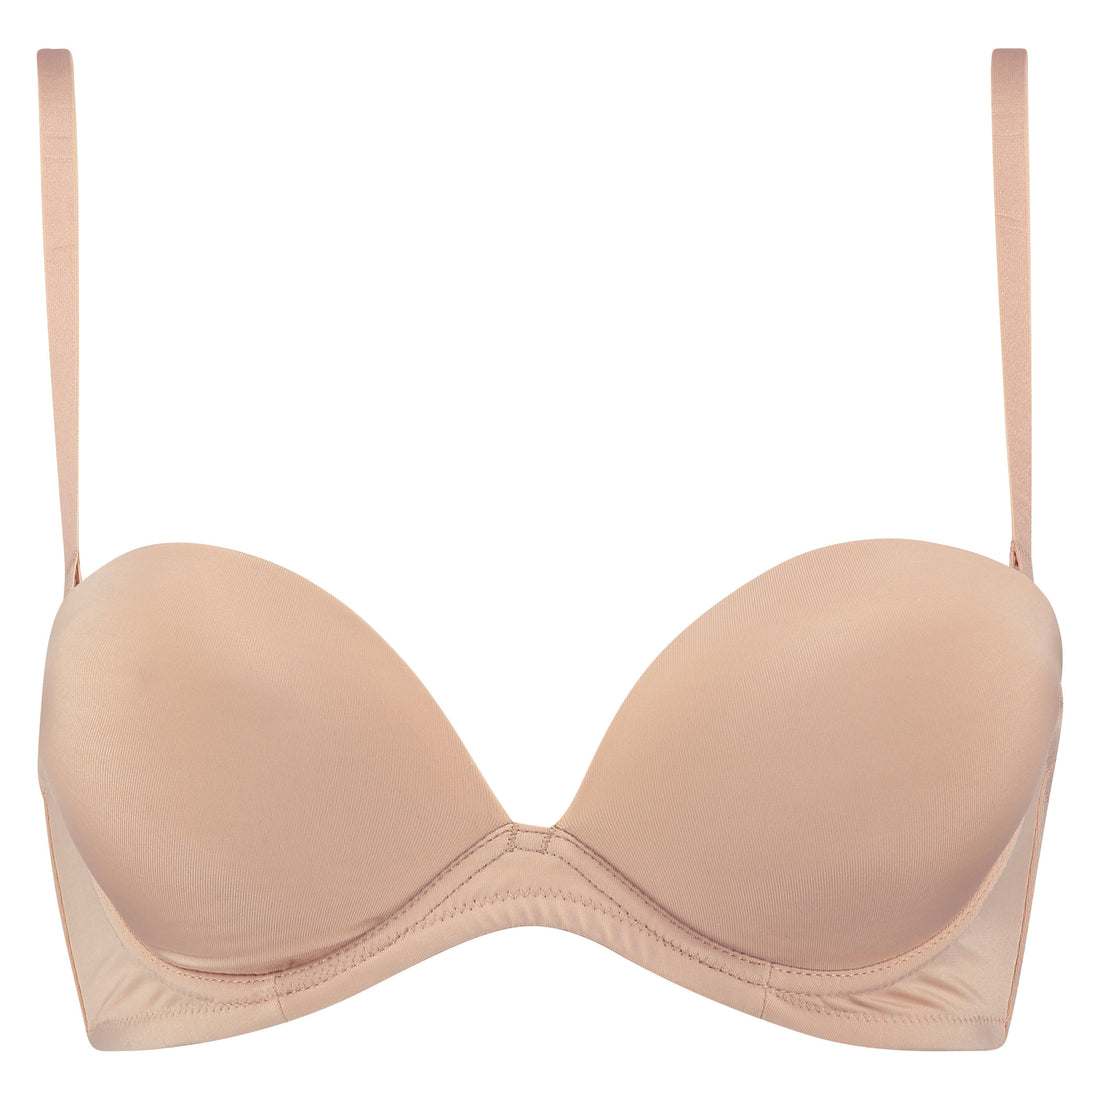 Maximizer Push Up Bra With Removable Straps In Different Cup Sizes_107813_Tan_01